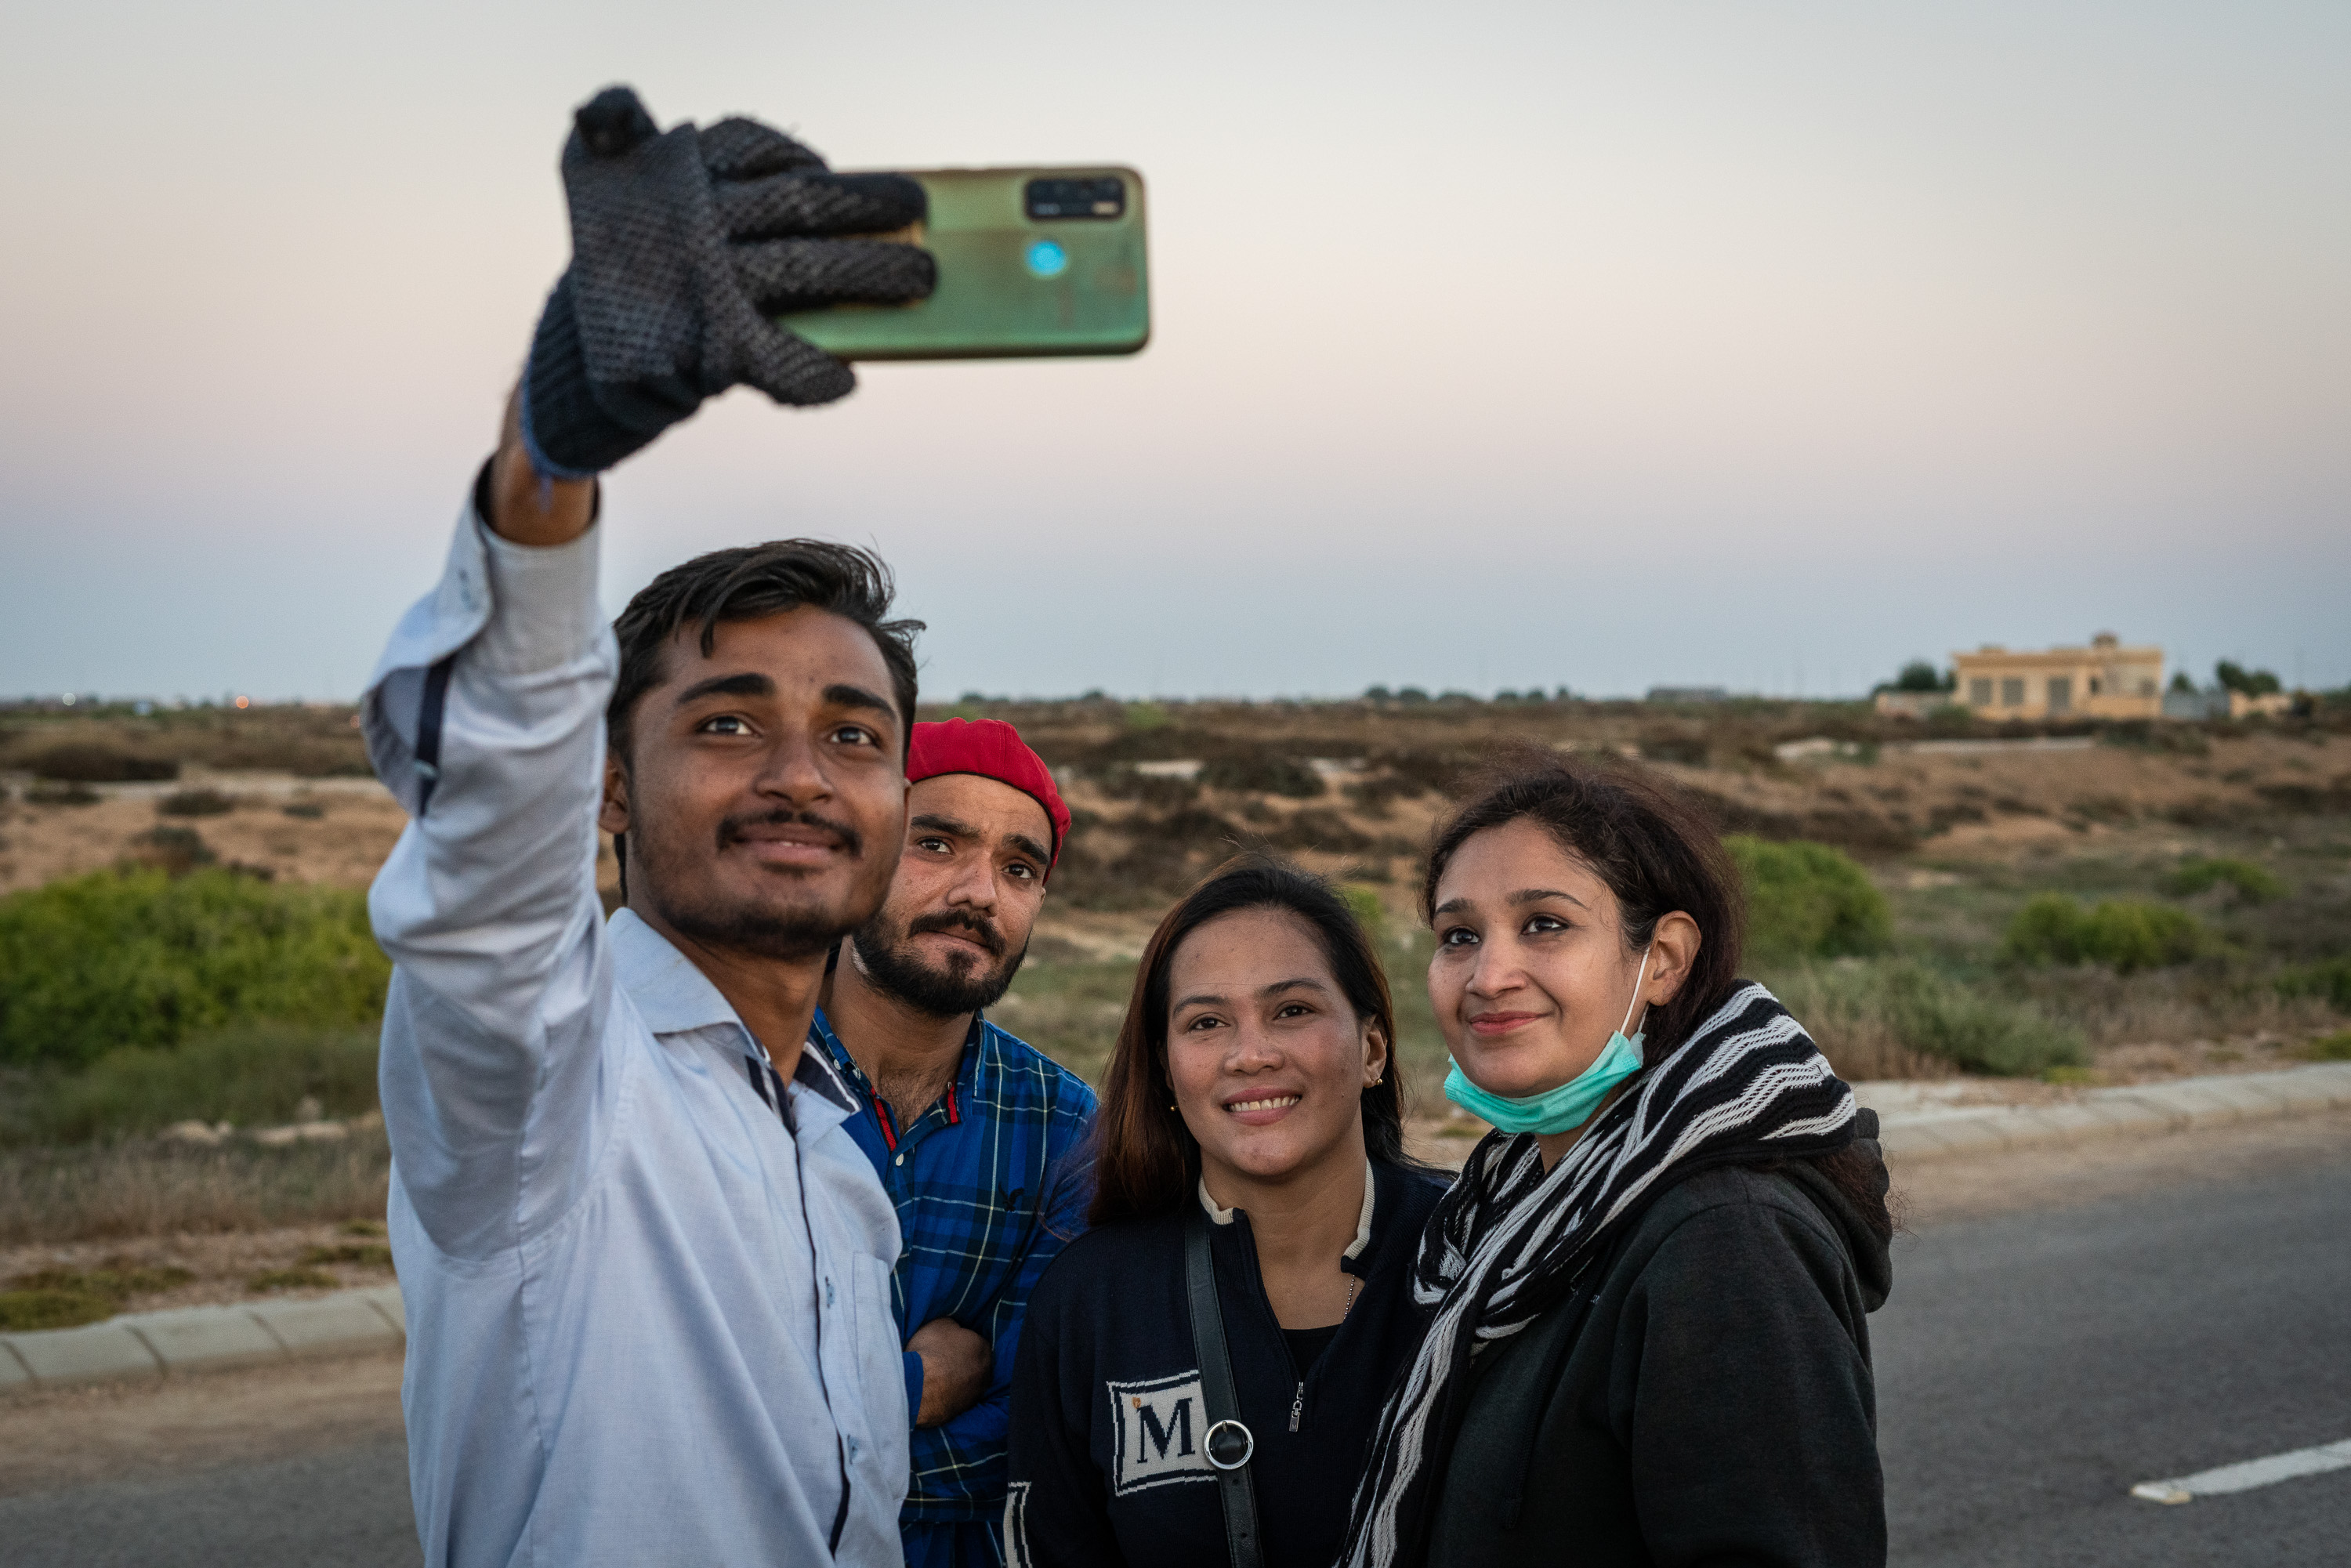 Sana Yacoob, Richelle Ventura and two Pink Riders riding instructors (from right) take a selfie at the end of the day in Karachi (photo: Philipp Breu)